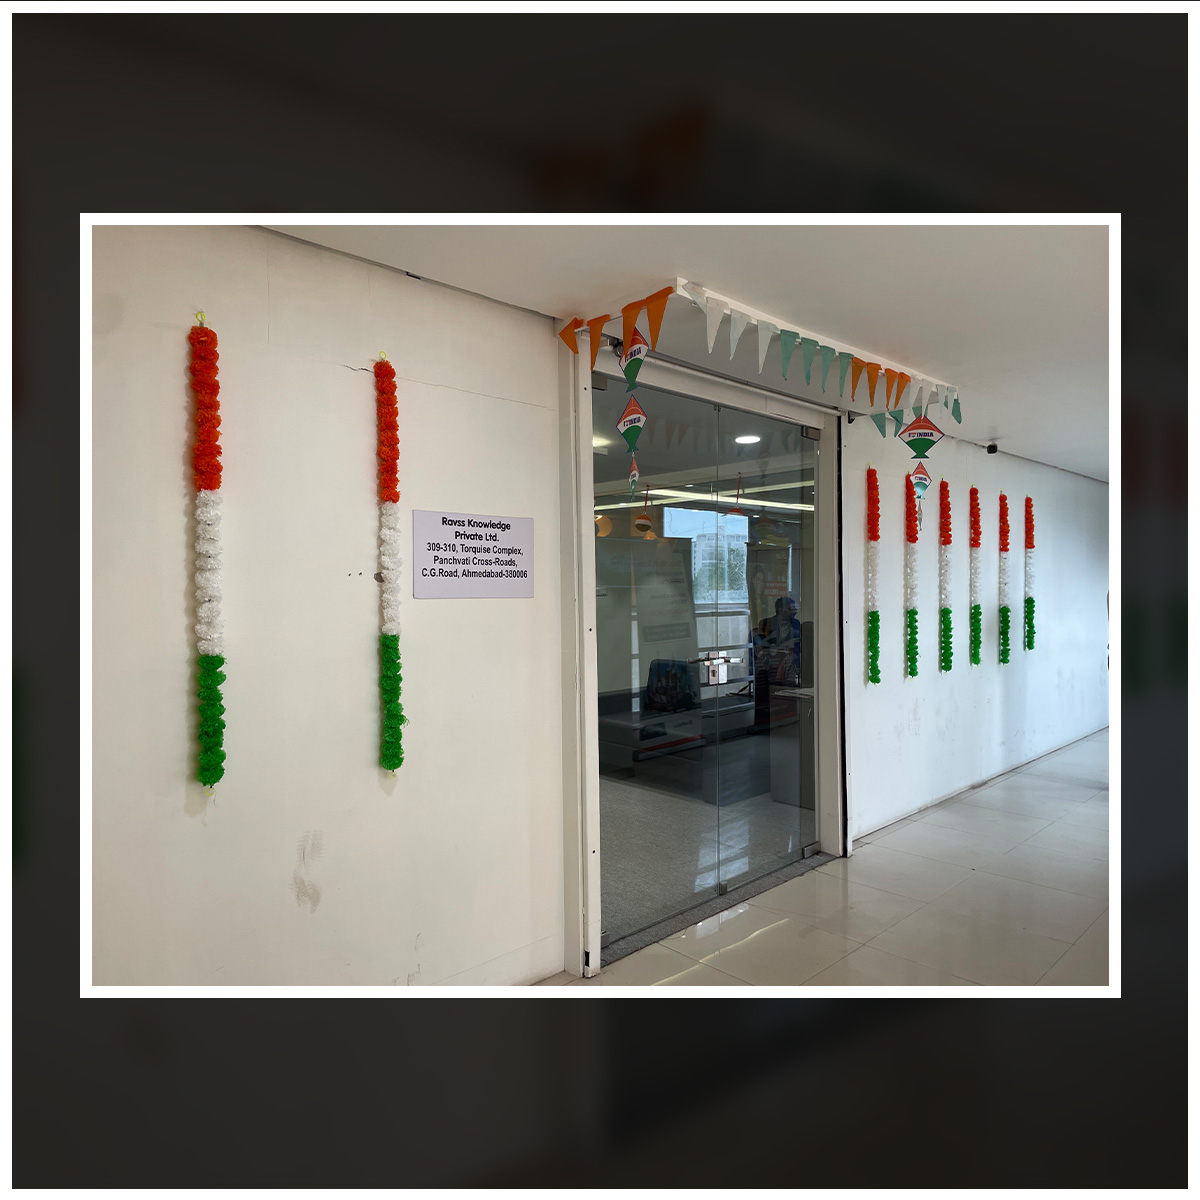 Independence Day Celebration at INSD Ahmedabad! 🇮🇳 🎨✨ Mentors and Students united to deck the institute in tricolor splendor. Every flag embodied our rich heritage. The celebration echoed our commitment to design and freedom. 🥳🎉 #INSDIndependenceDay #TricolourExpressions